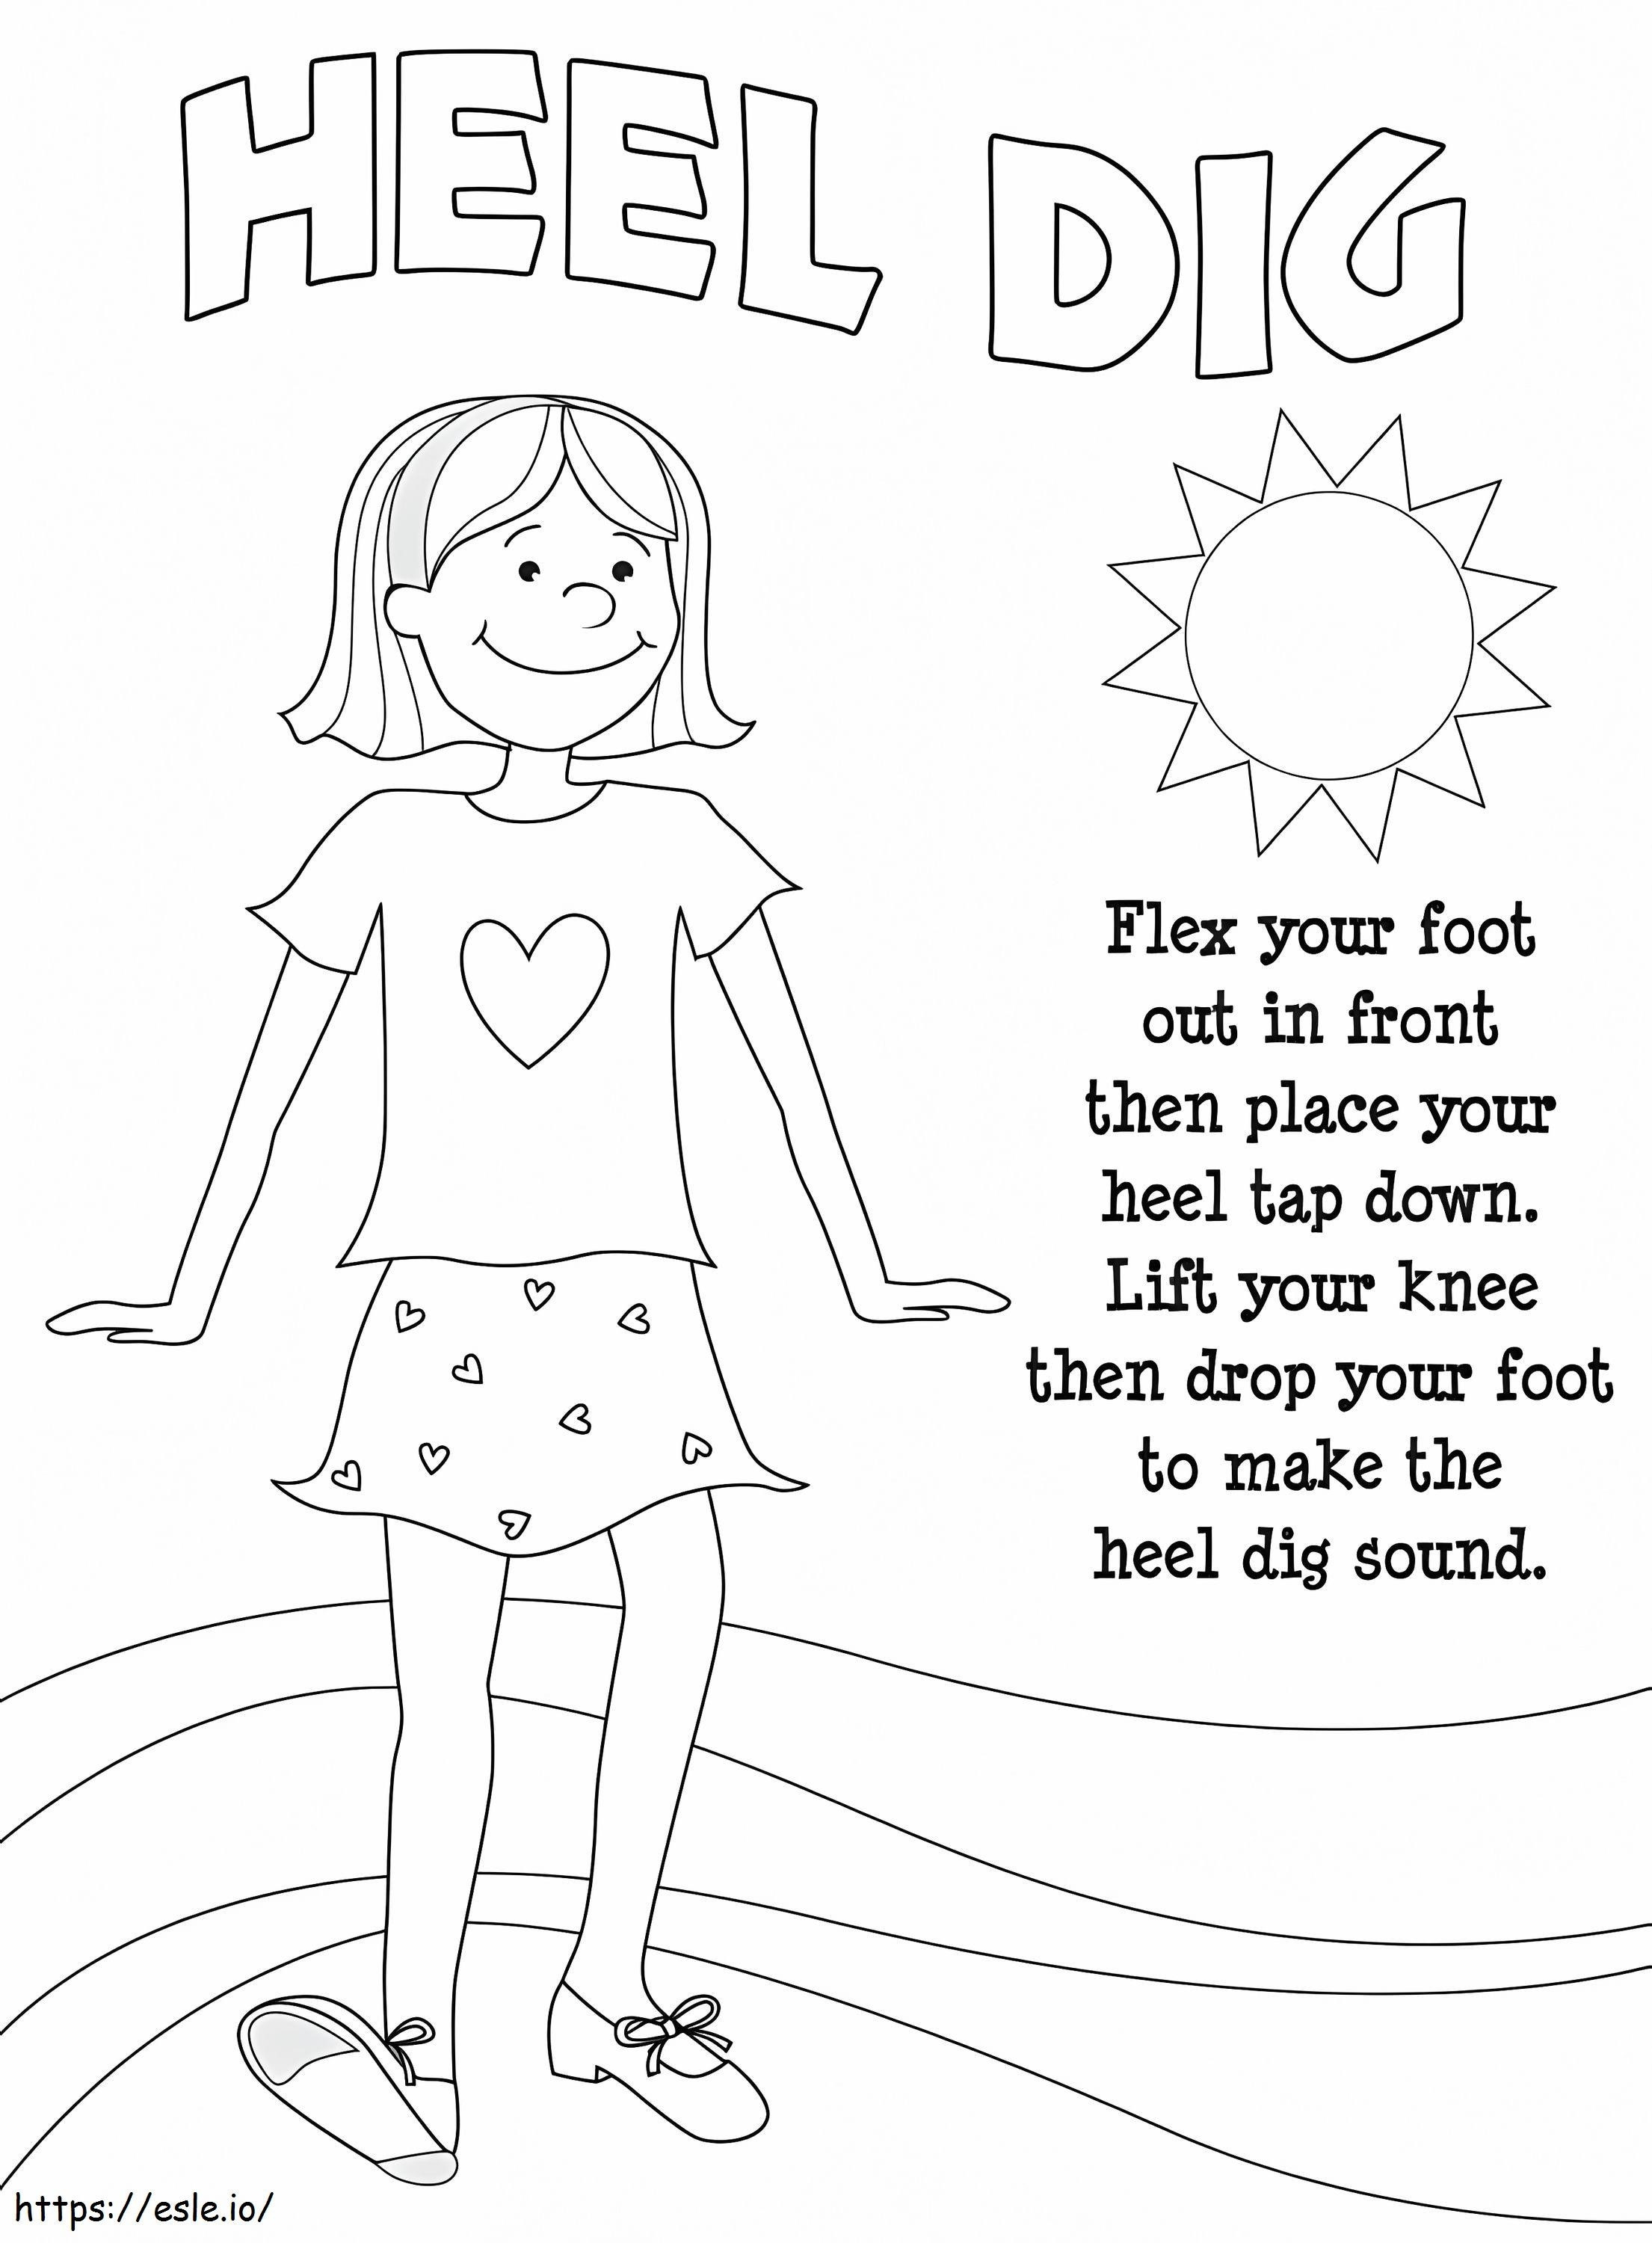 Tap Dancer coloring page